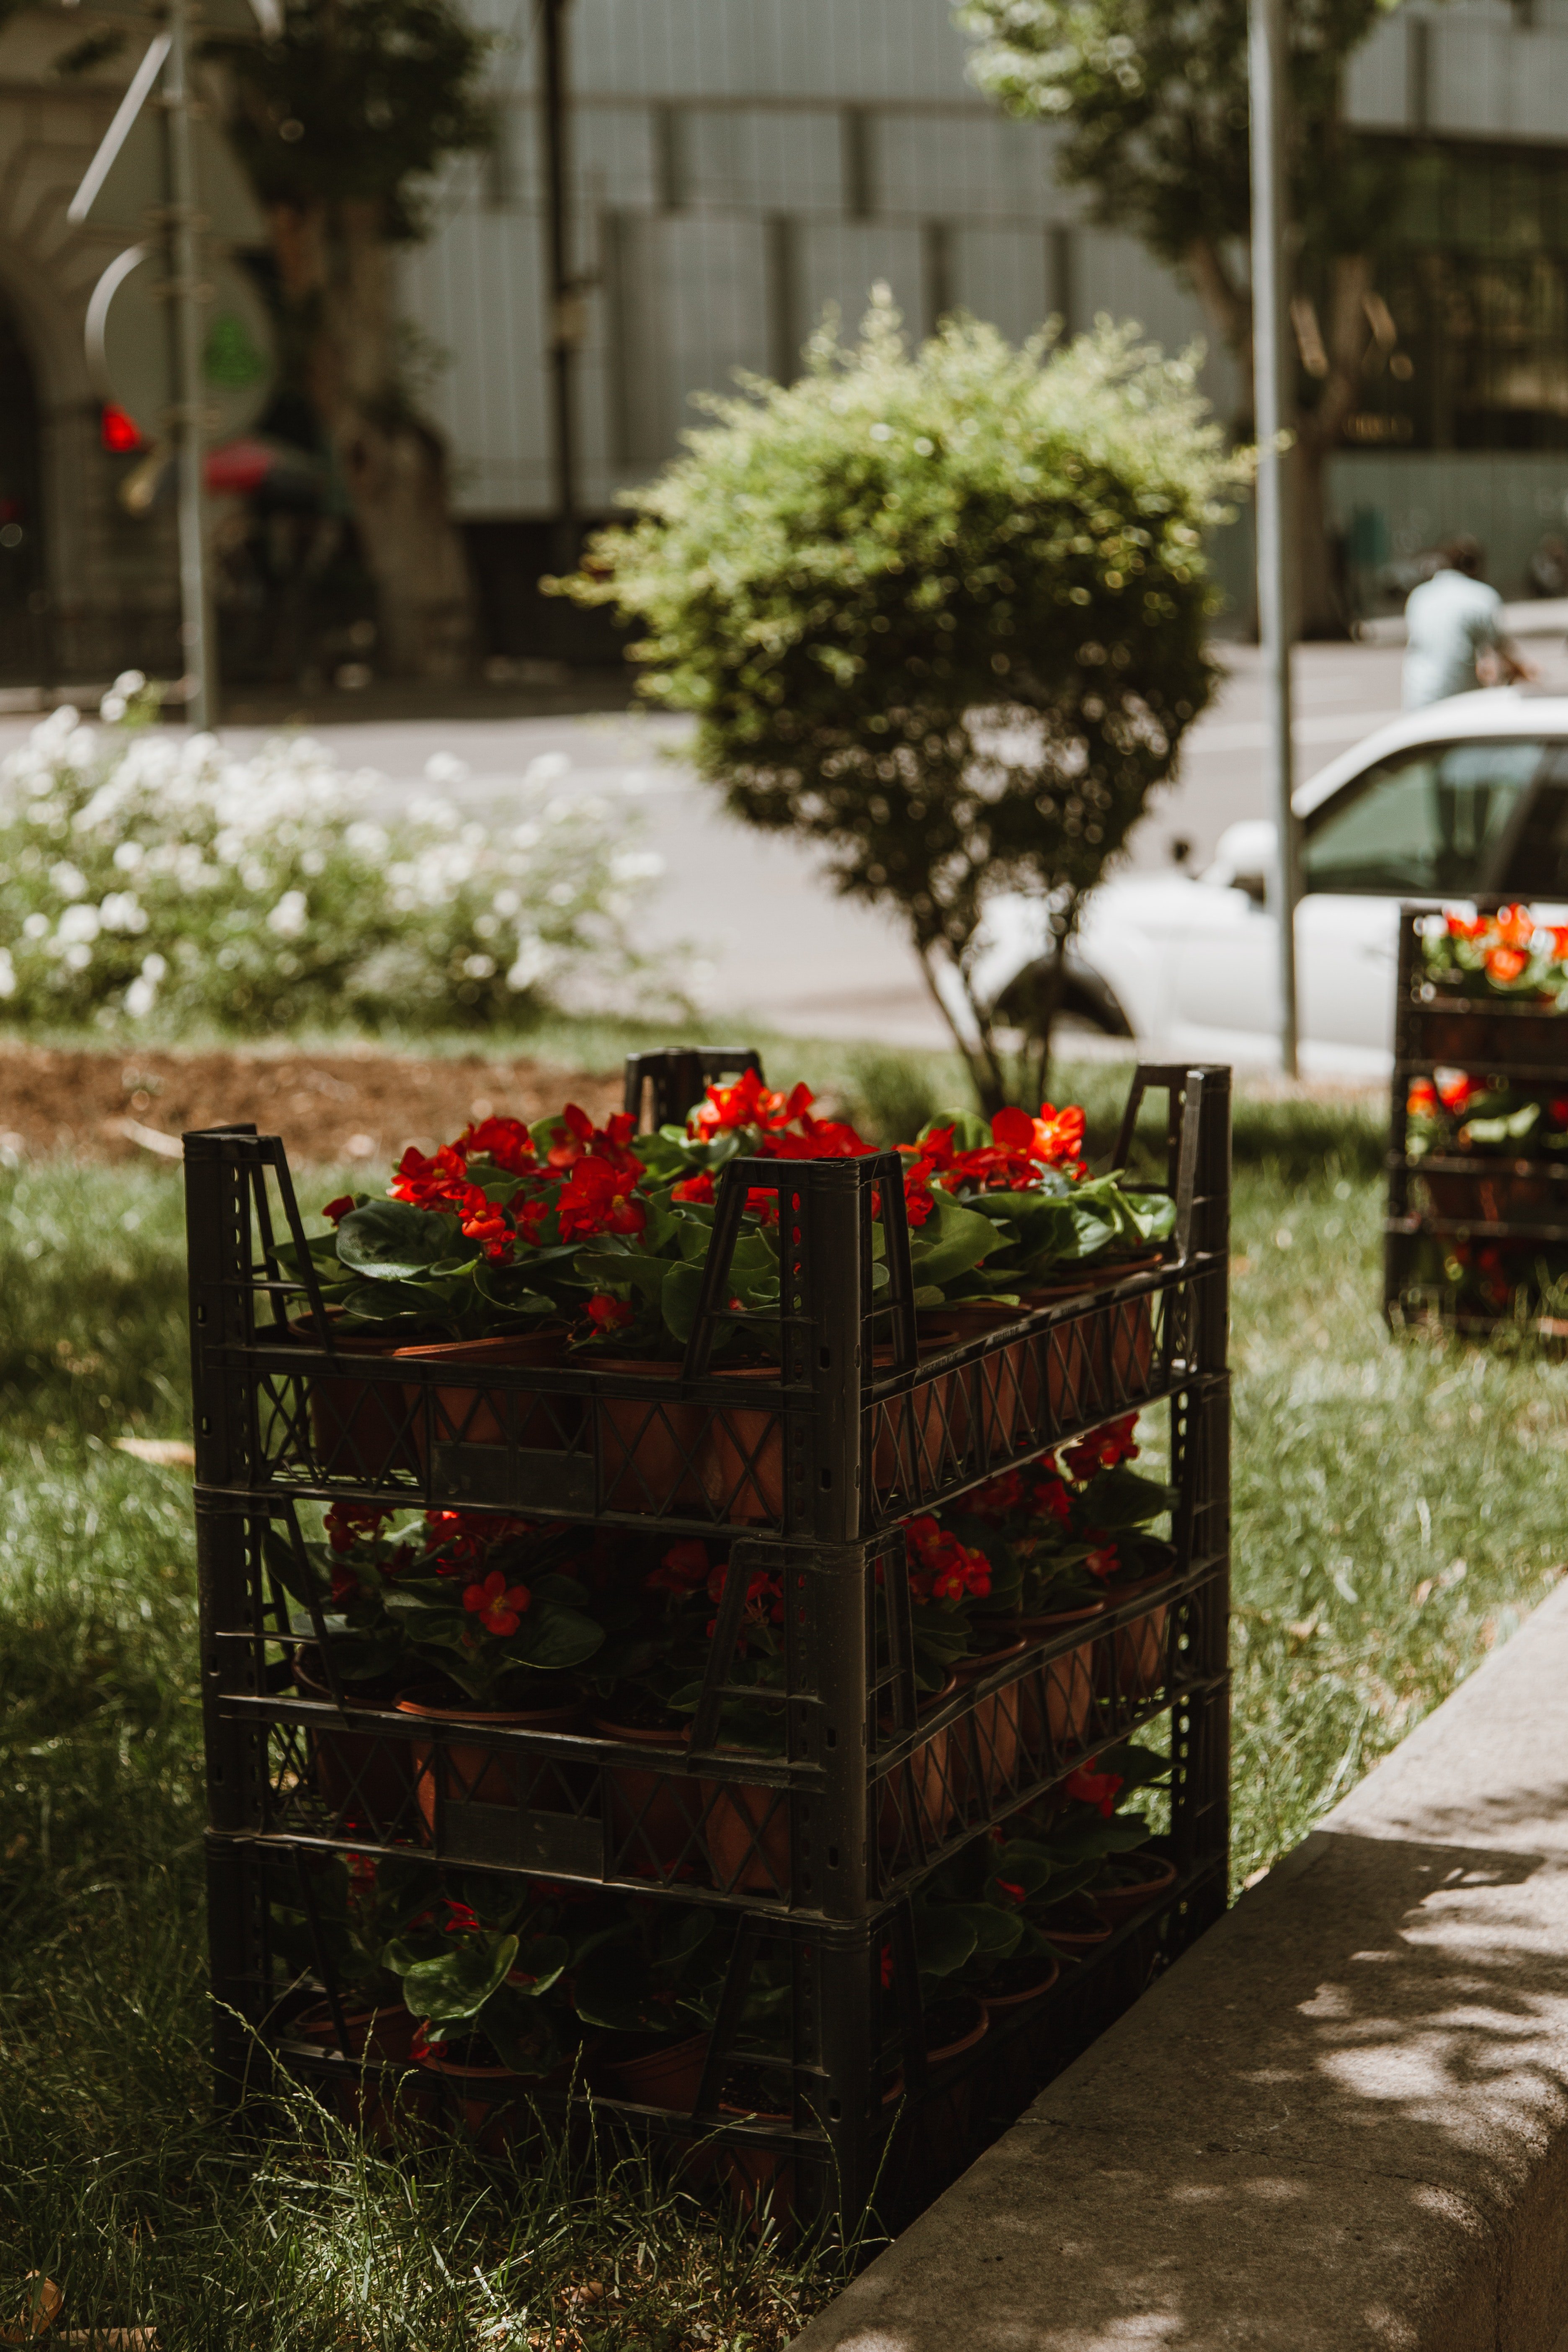 Emily was delighted to see her new garden. | Source: Pexels